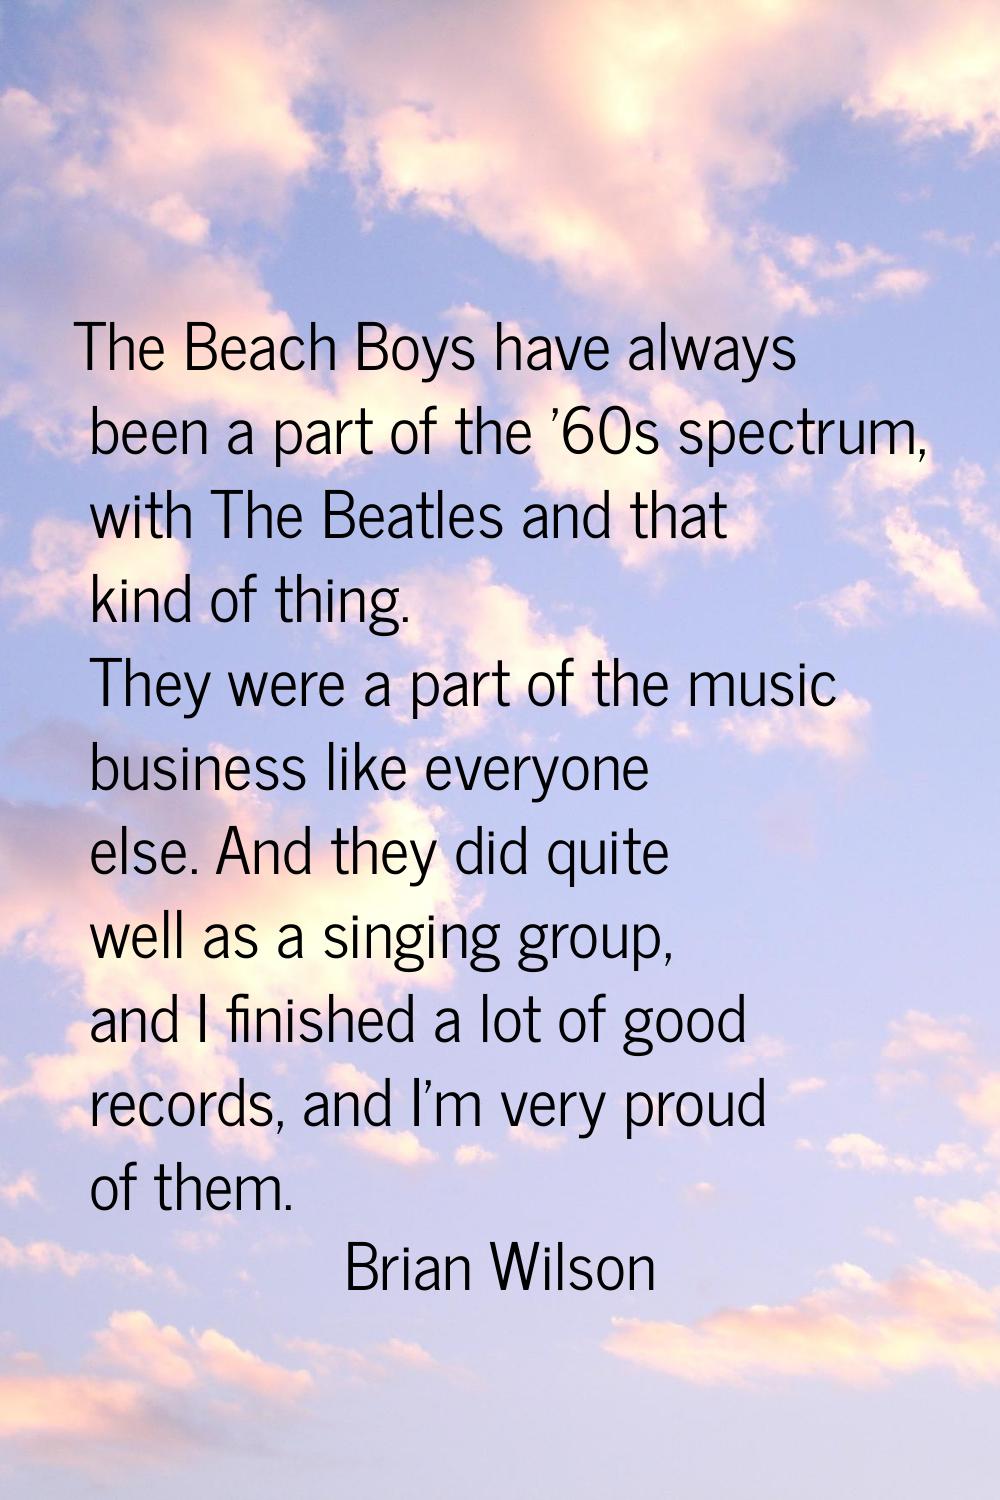 The Beach Boys have always been a part of the '60s spectrum, with The Beatles and that kind of thin